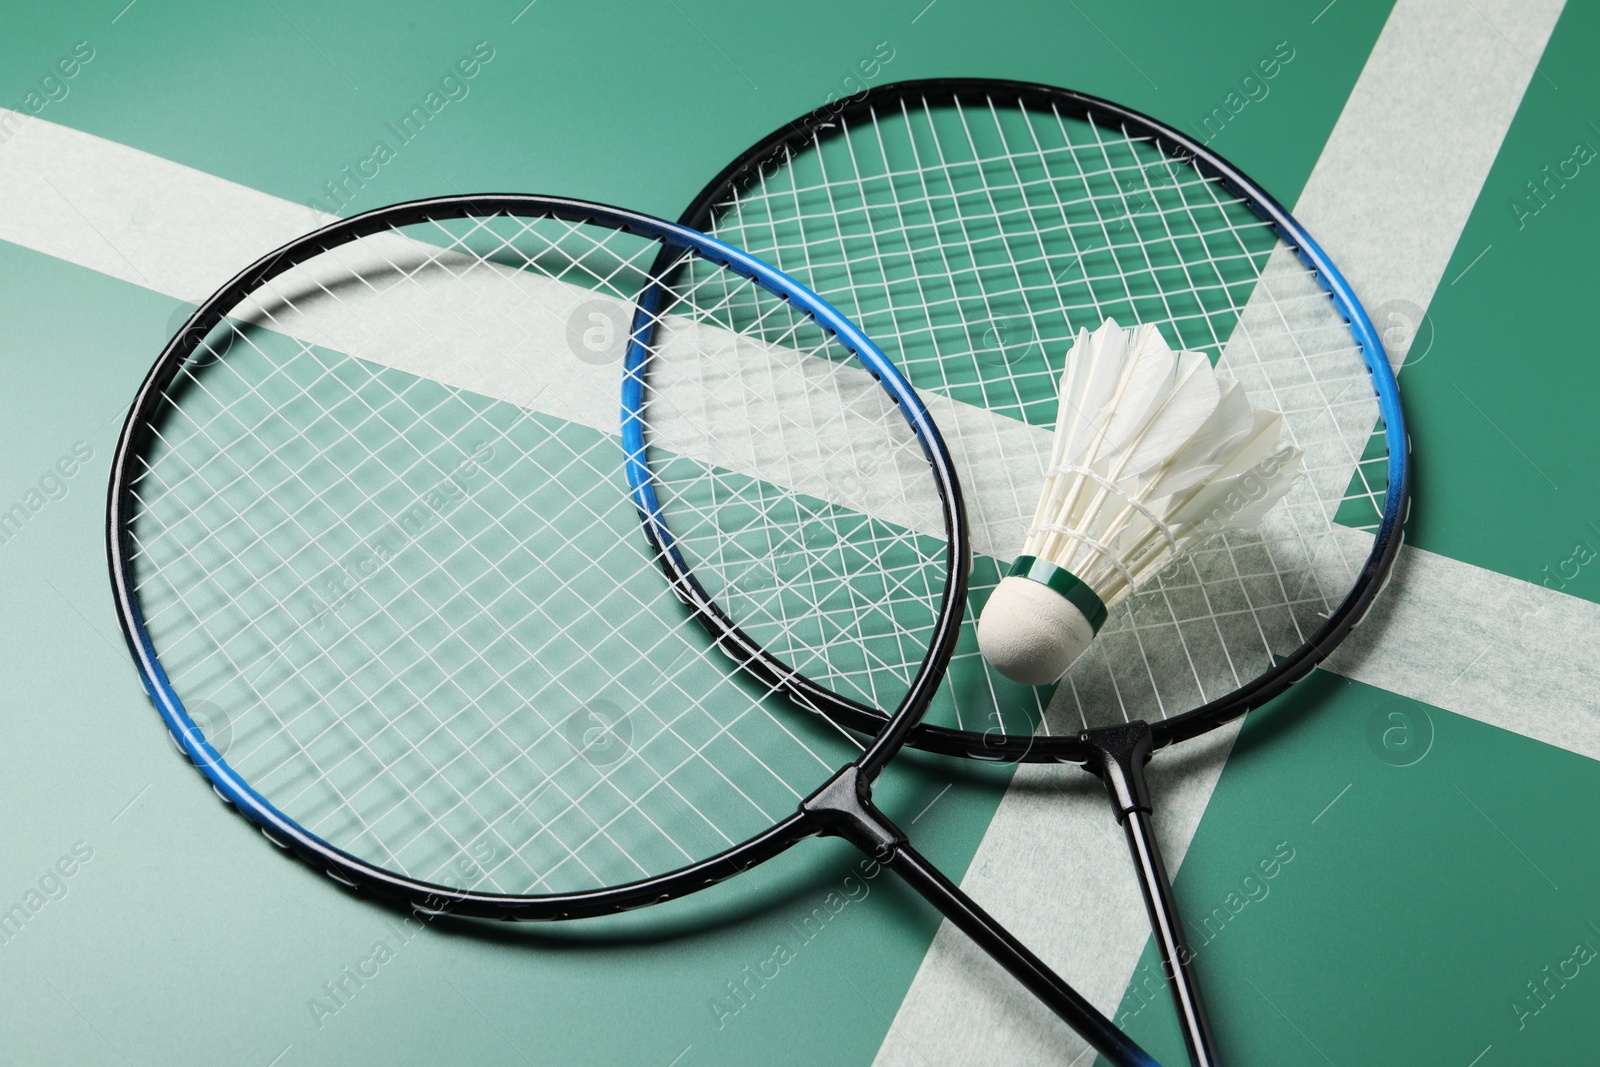 Photo of Feather badminton shuttlecock and rackets on green table, closeup